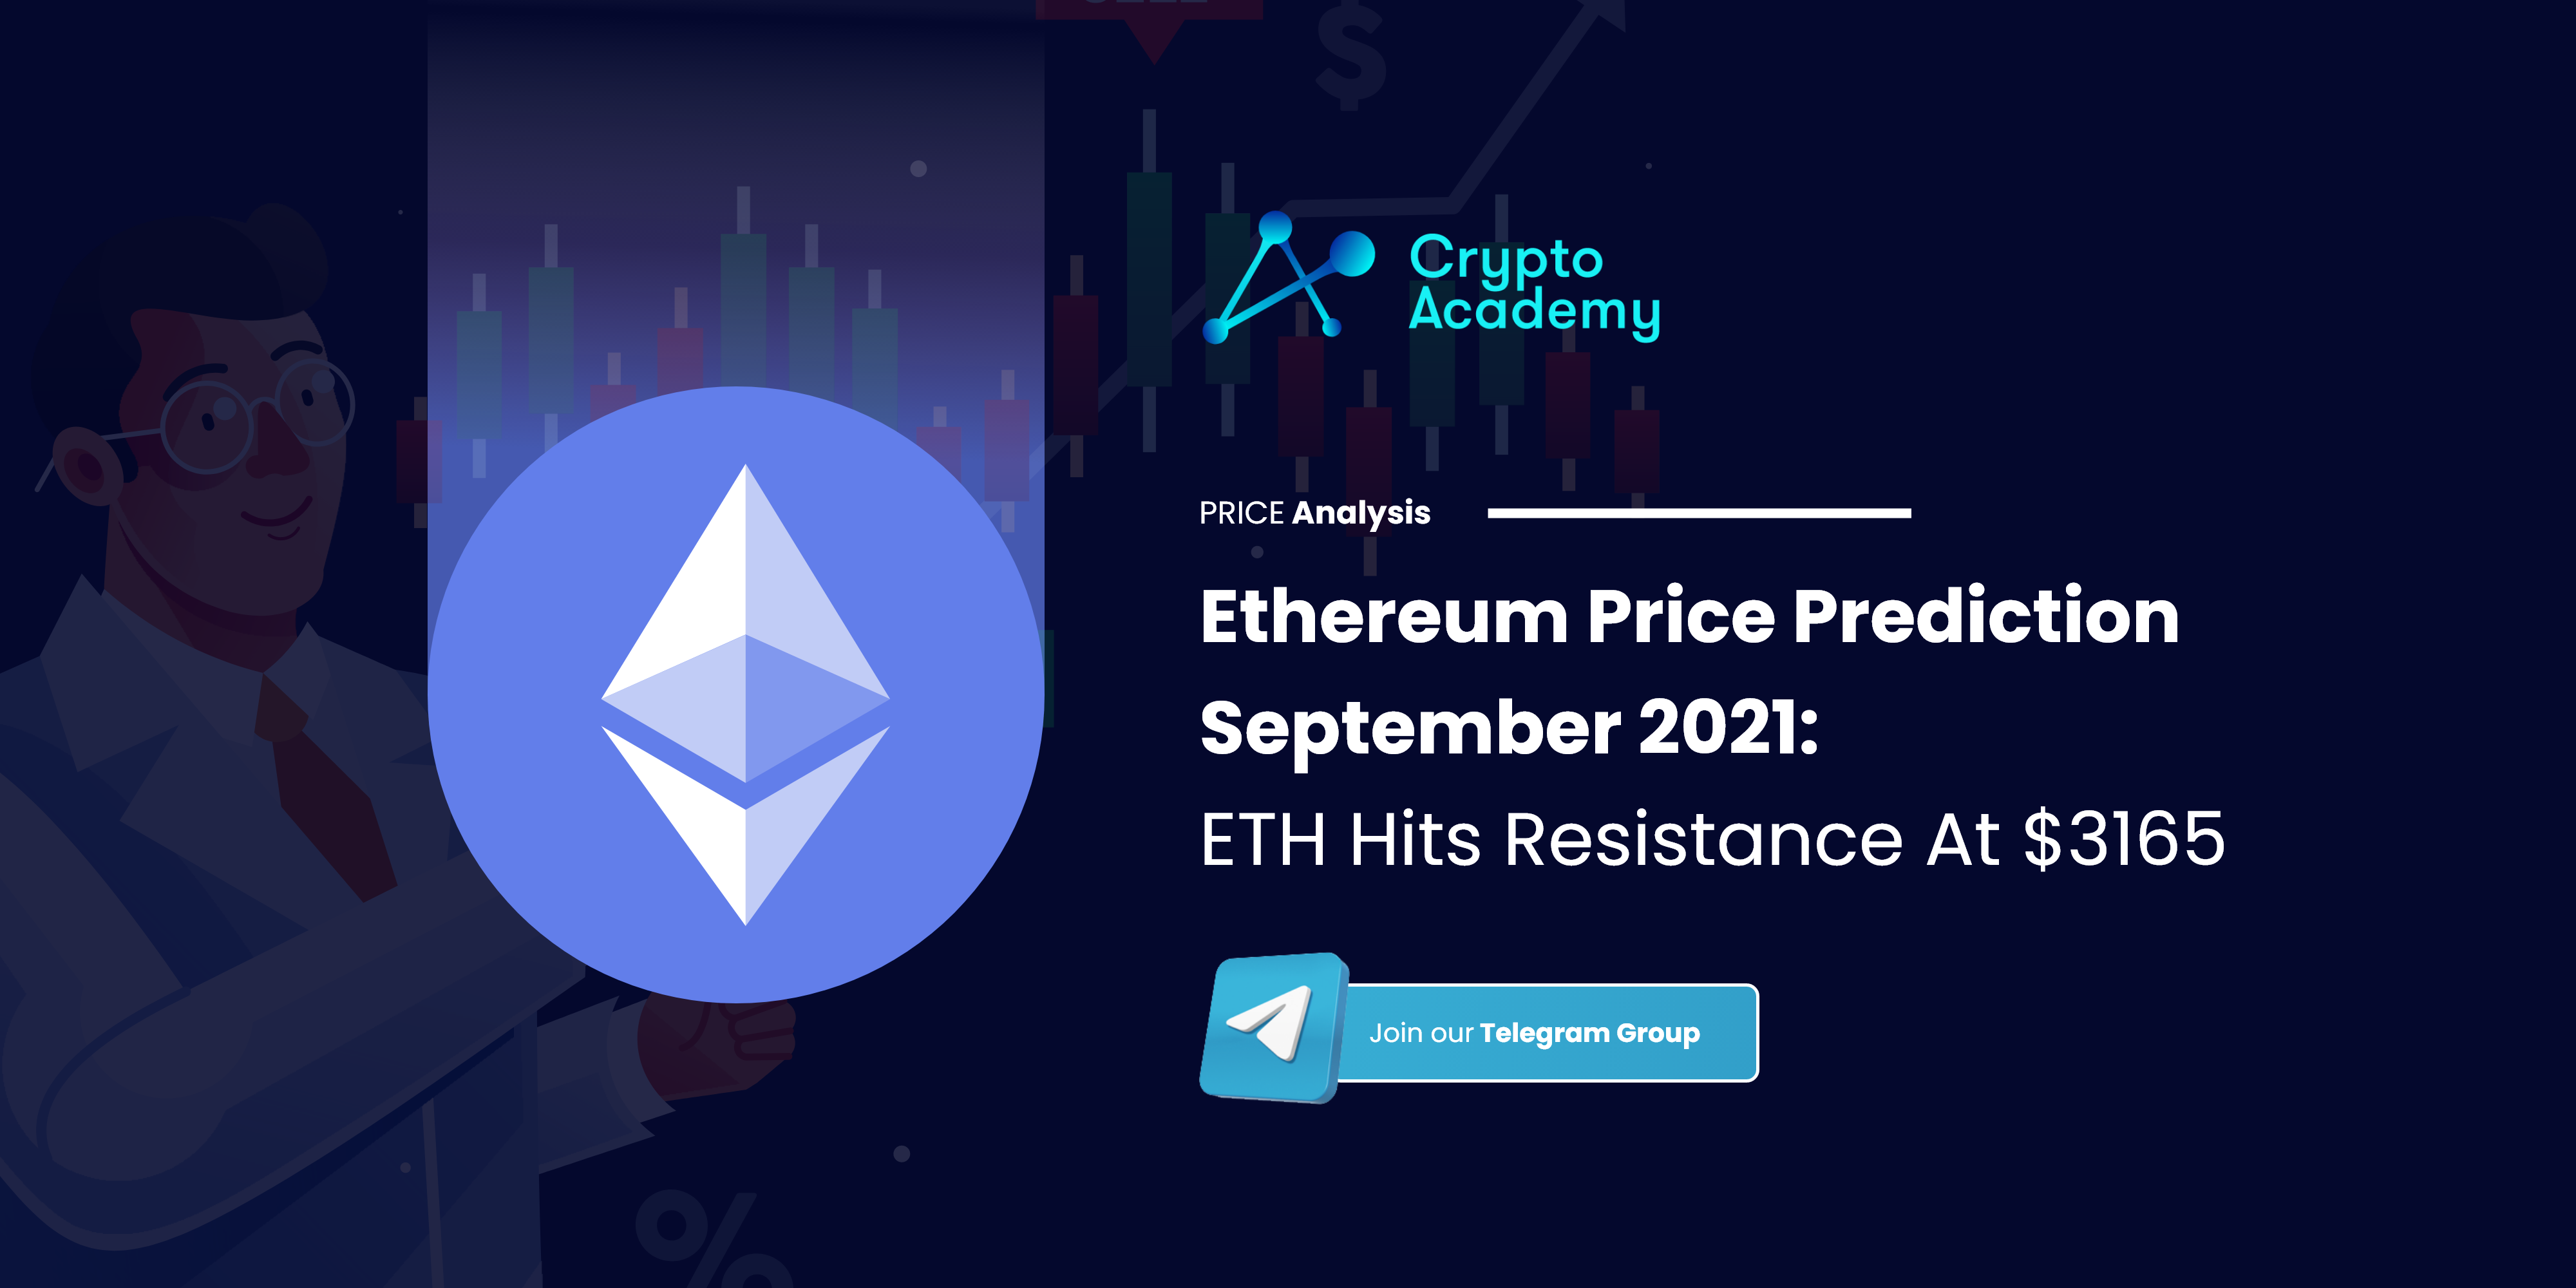 Ethereum Price Prediction September 2021: ETH Hits Resistance At $3165